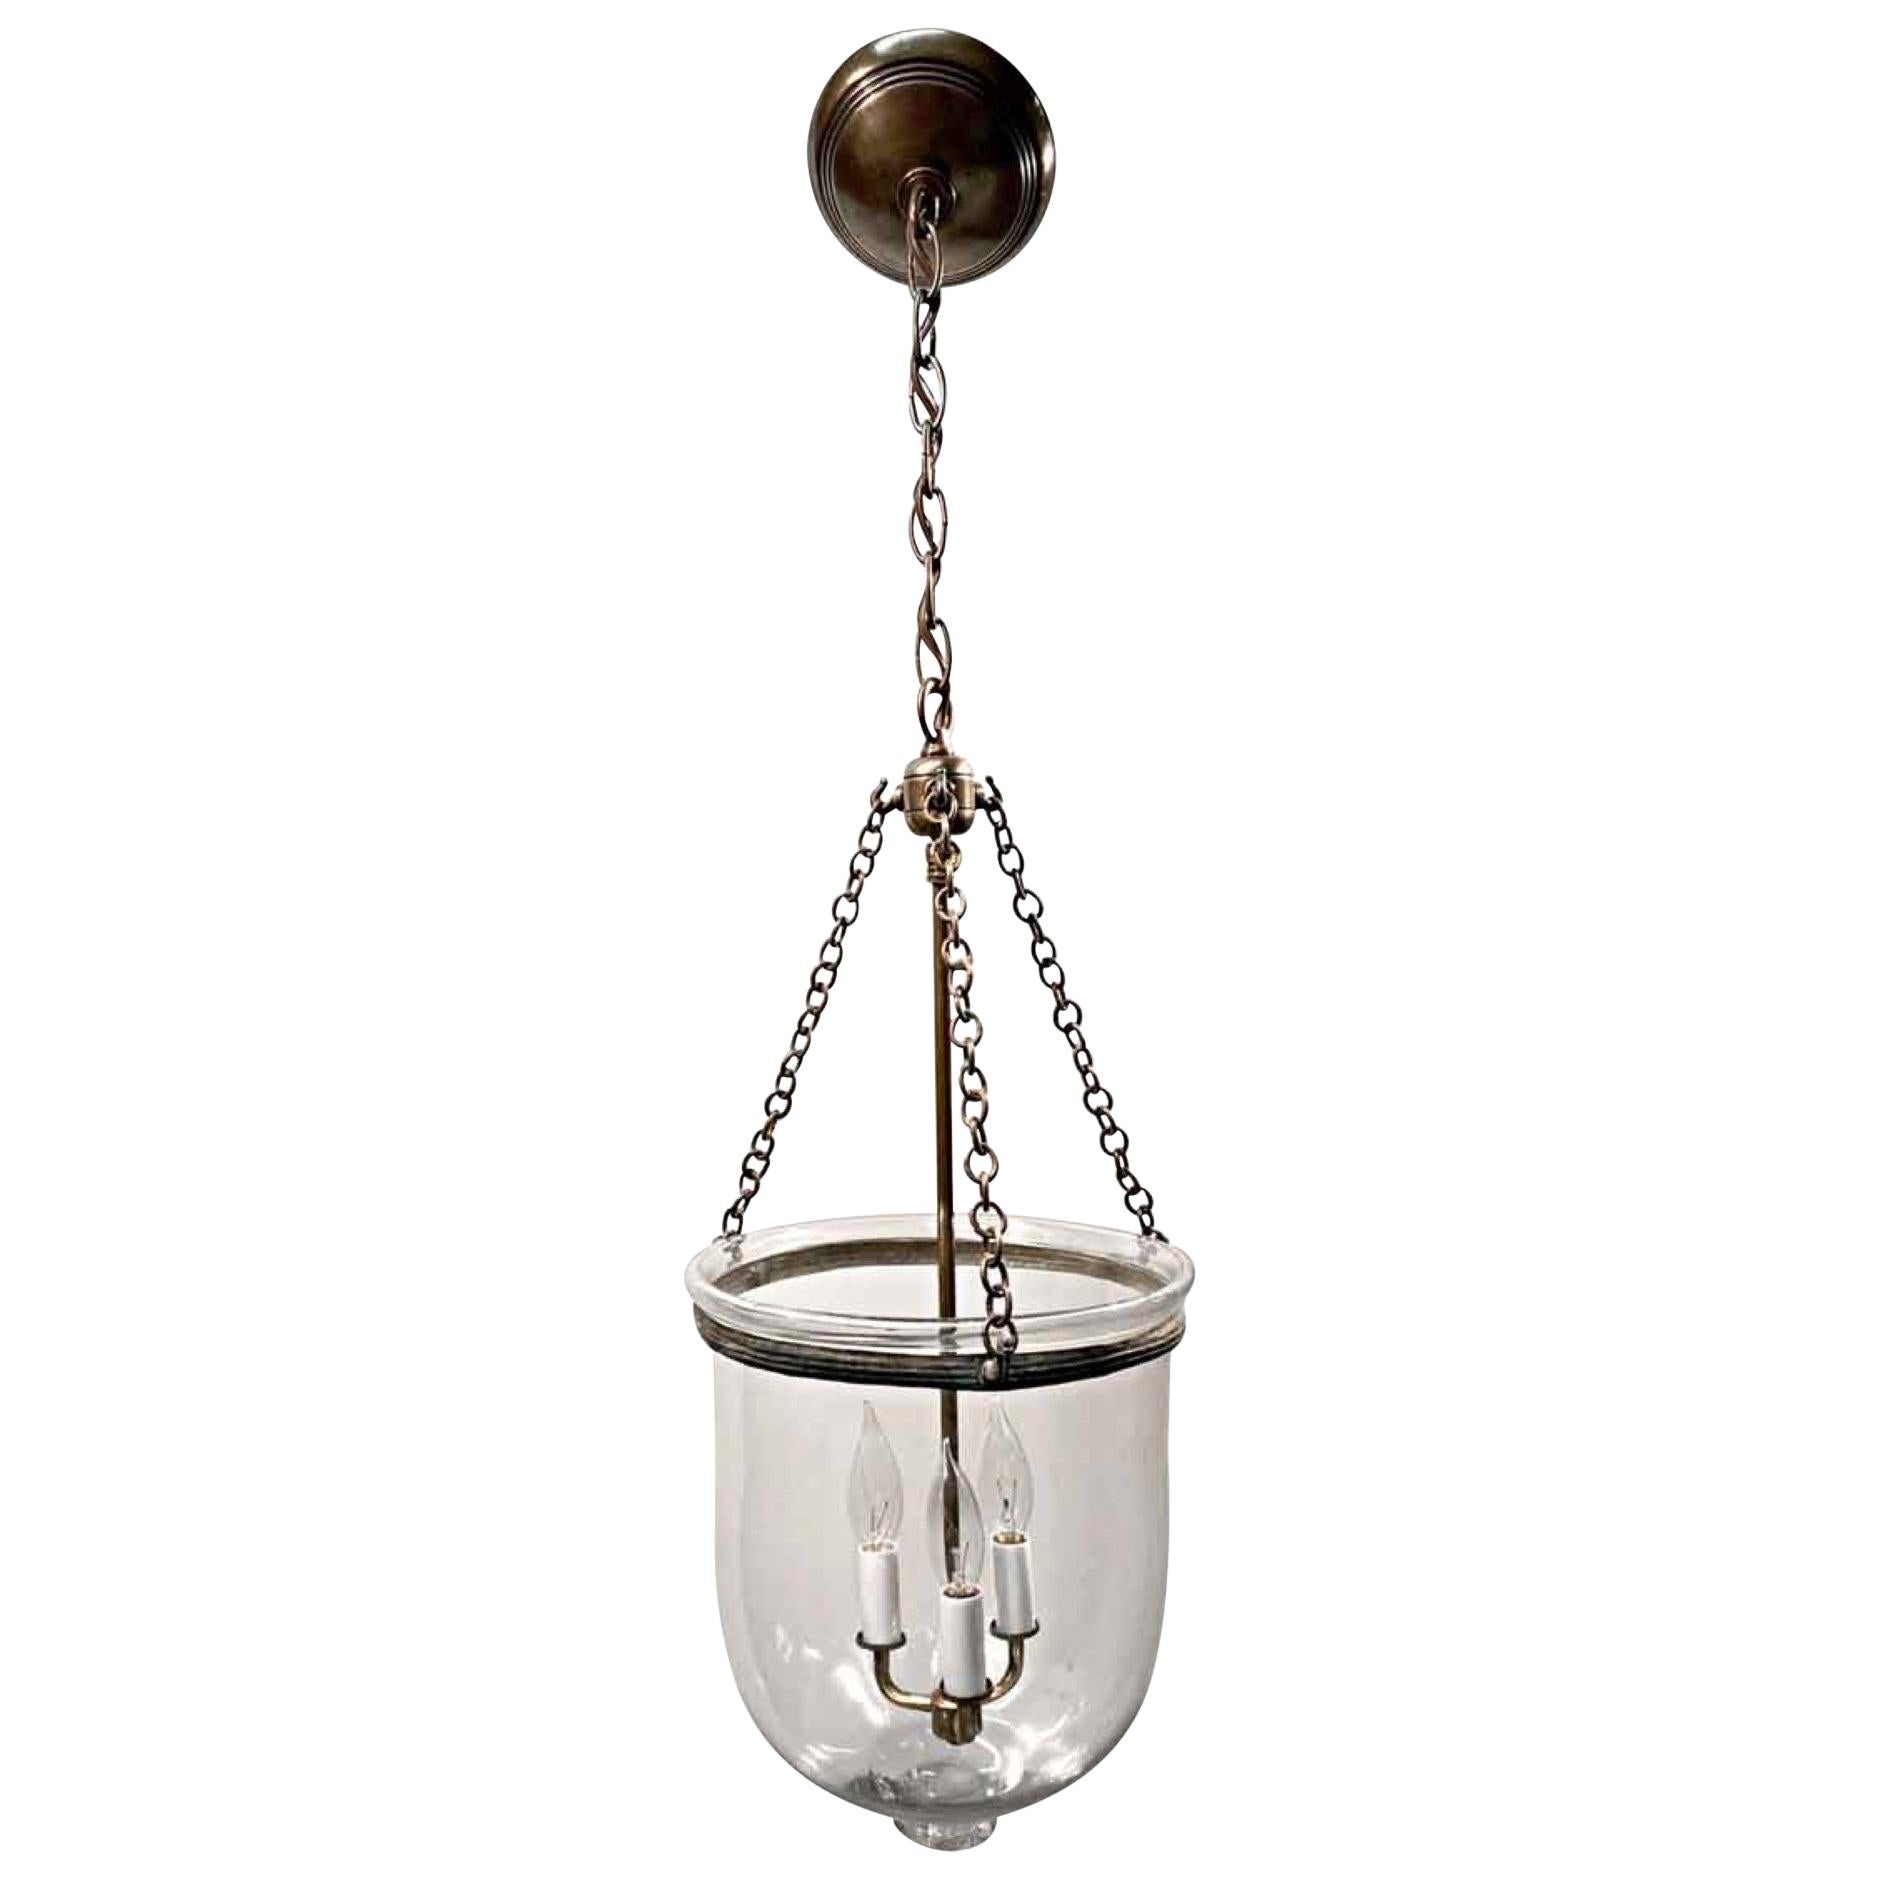 1890s Whale Oil English Clear Crystal Bell Jar Pendant Lantern